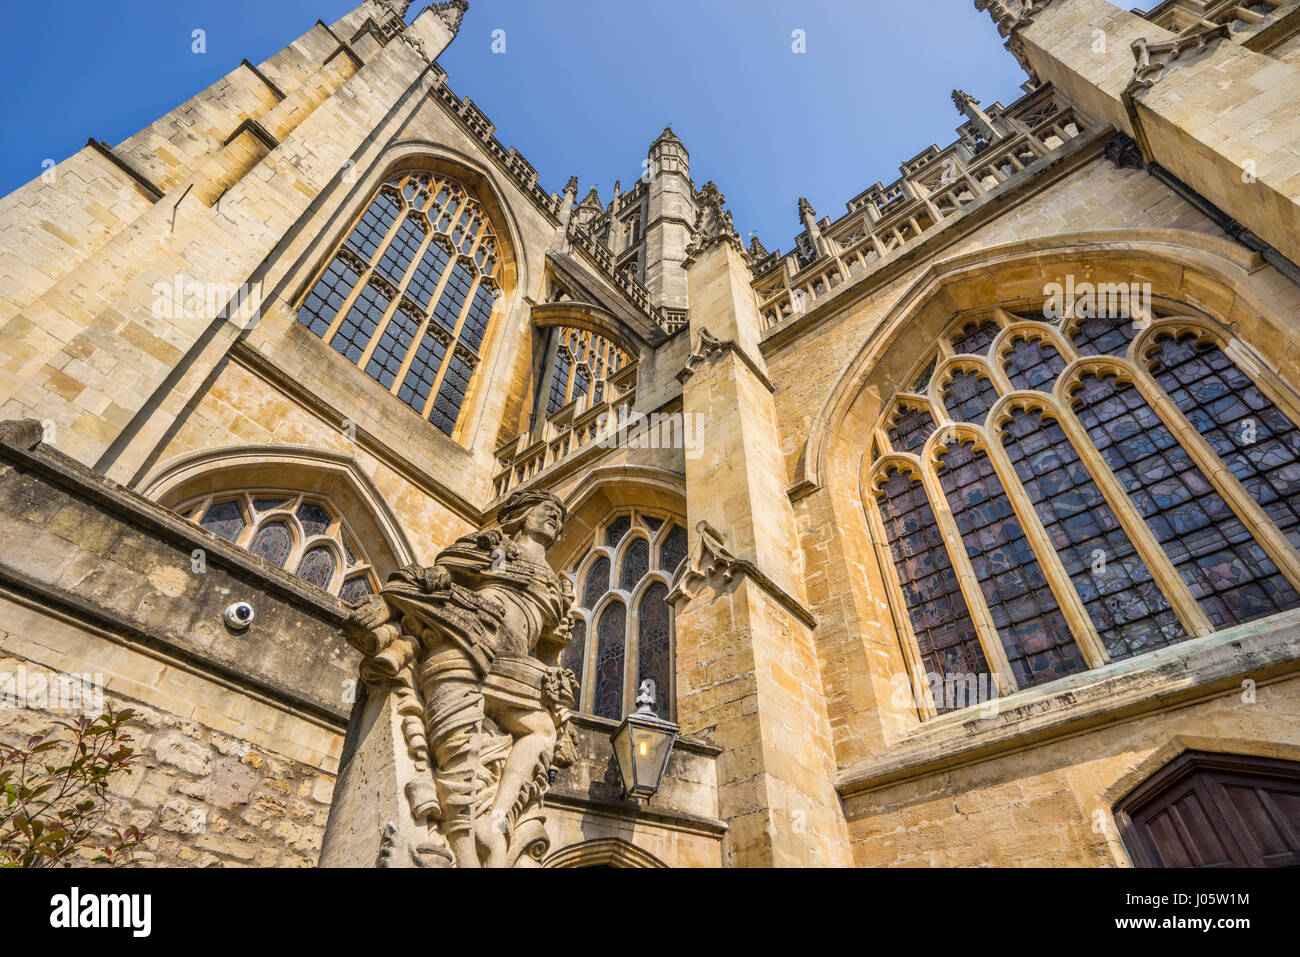 Bath; Somerset; South West England; United Kingdom; Bath Abbey; Abbey Church of Saint Peter and Saint Paul; Perpendicular Gothic; architecture Stock Photo